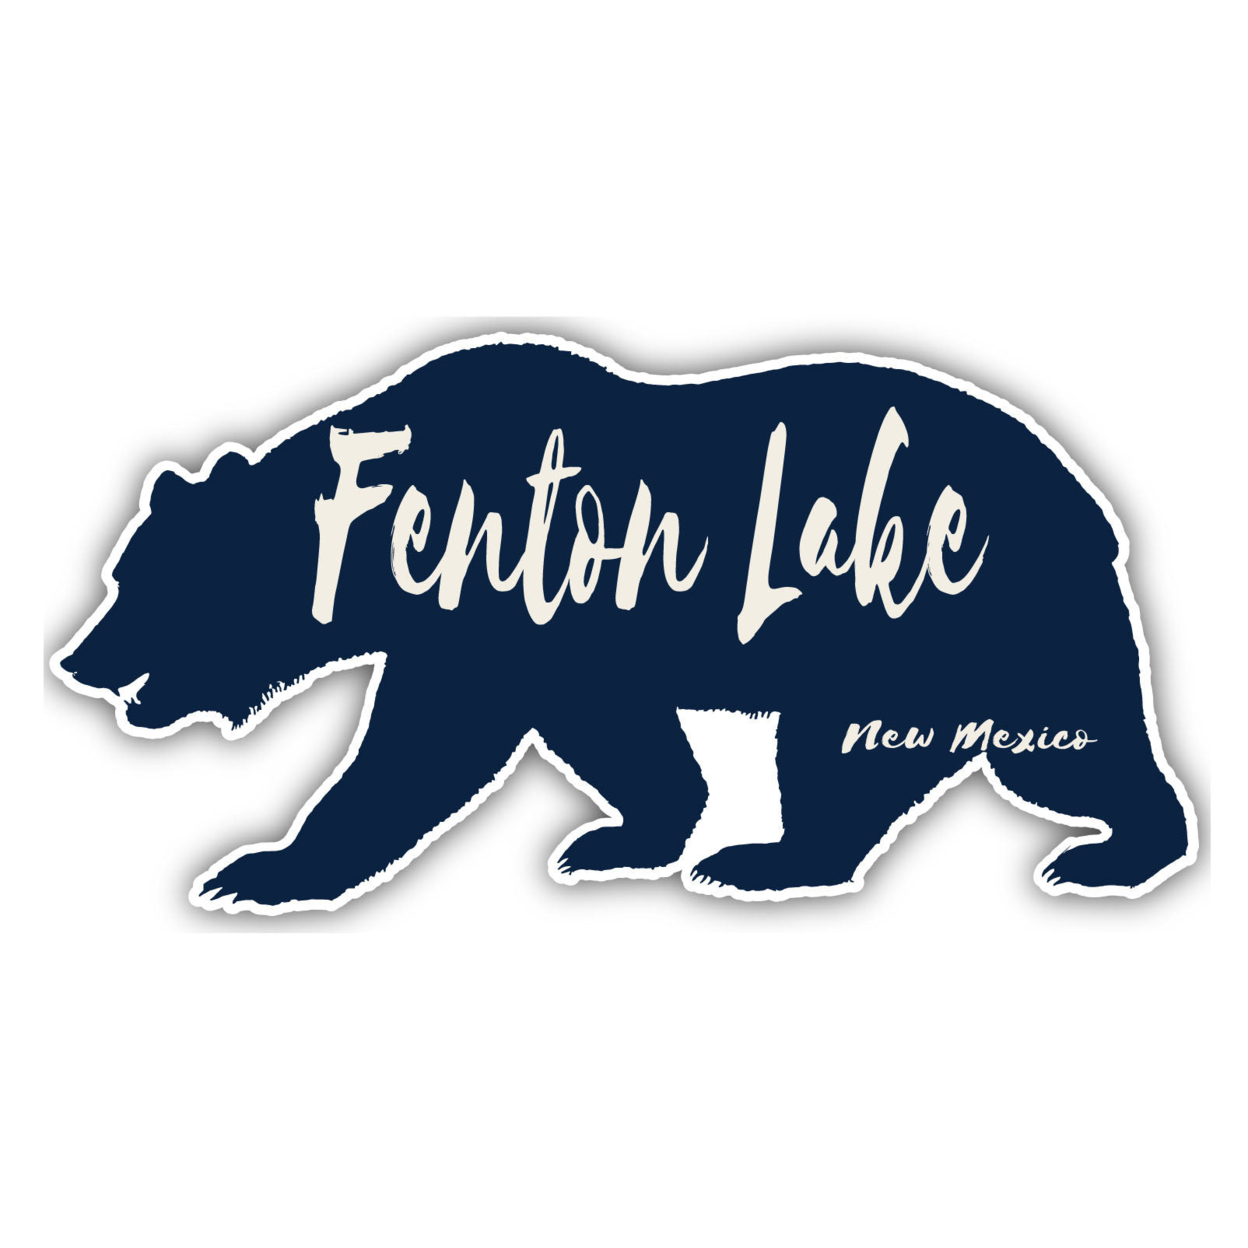 Fenton Lake New Mexico Souvenir Decorative Stickers (Choose Theme And Size) - 4-Pack, 8-Inch, Bear